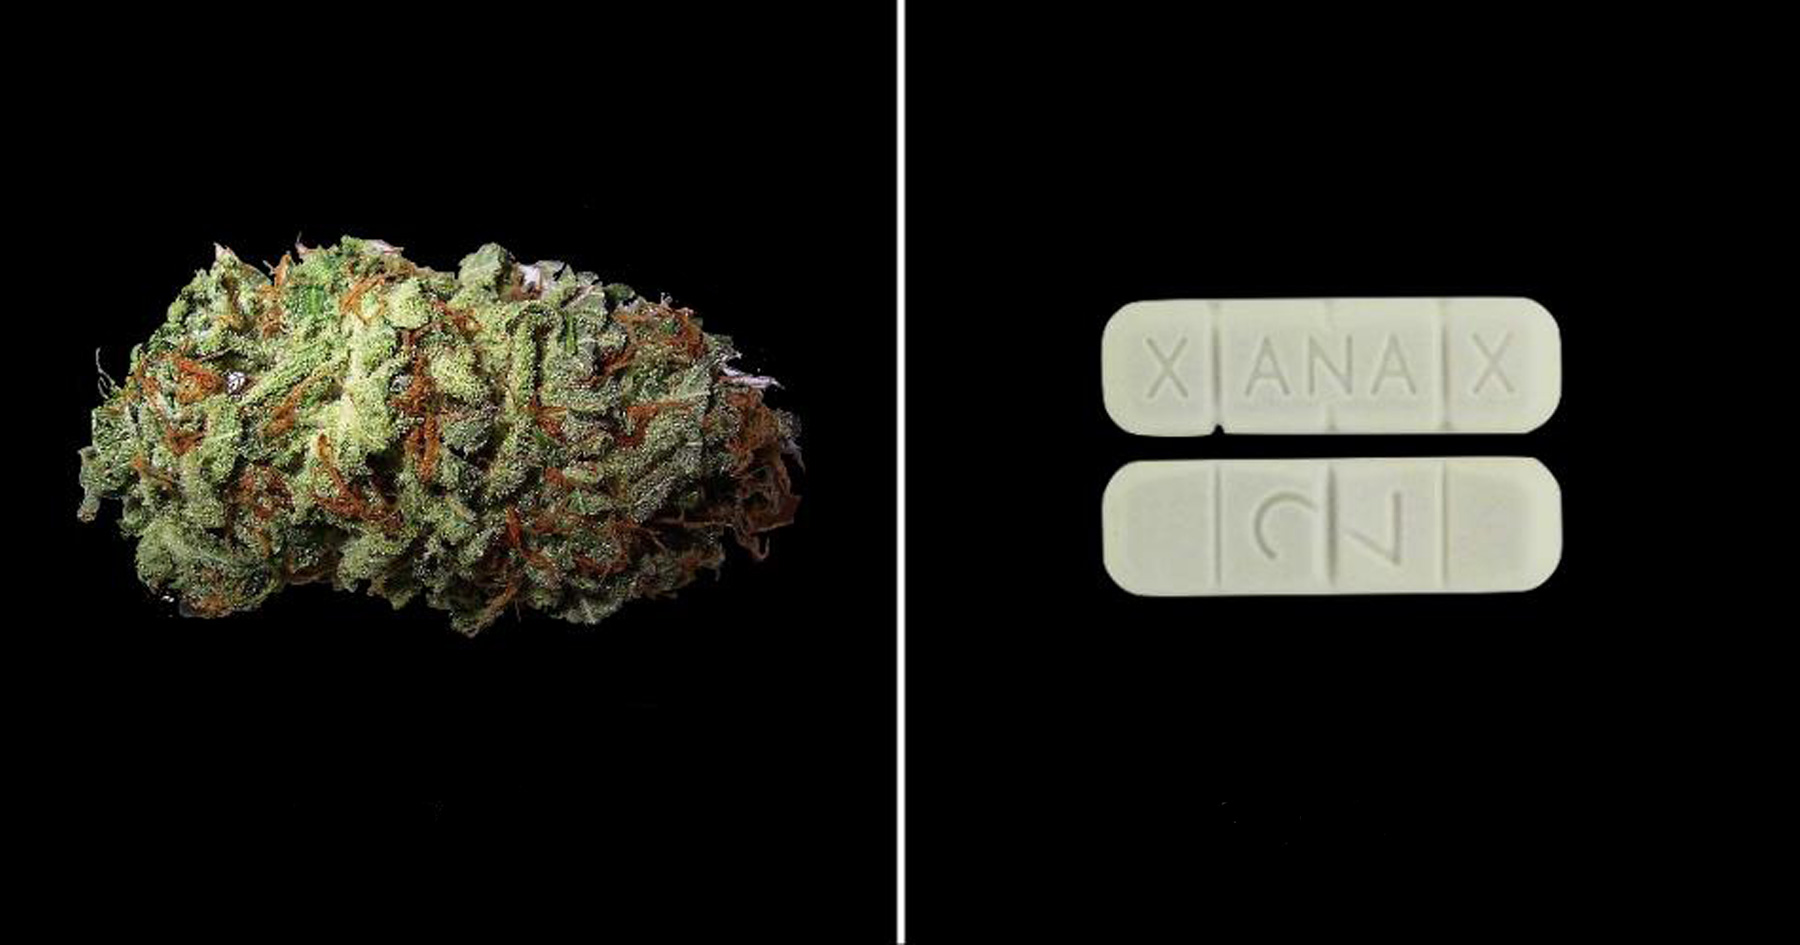 You take should with weed how much xanax